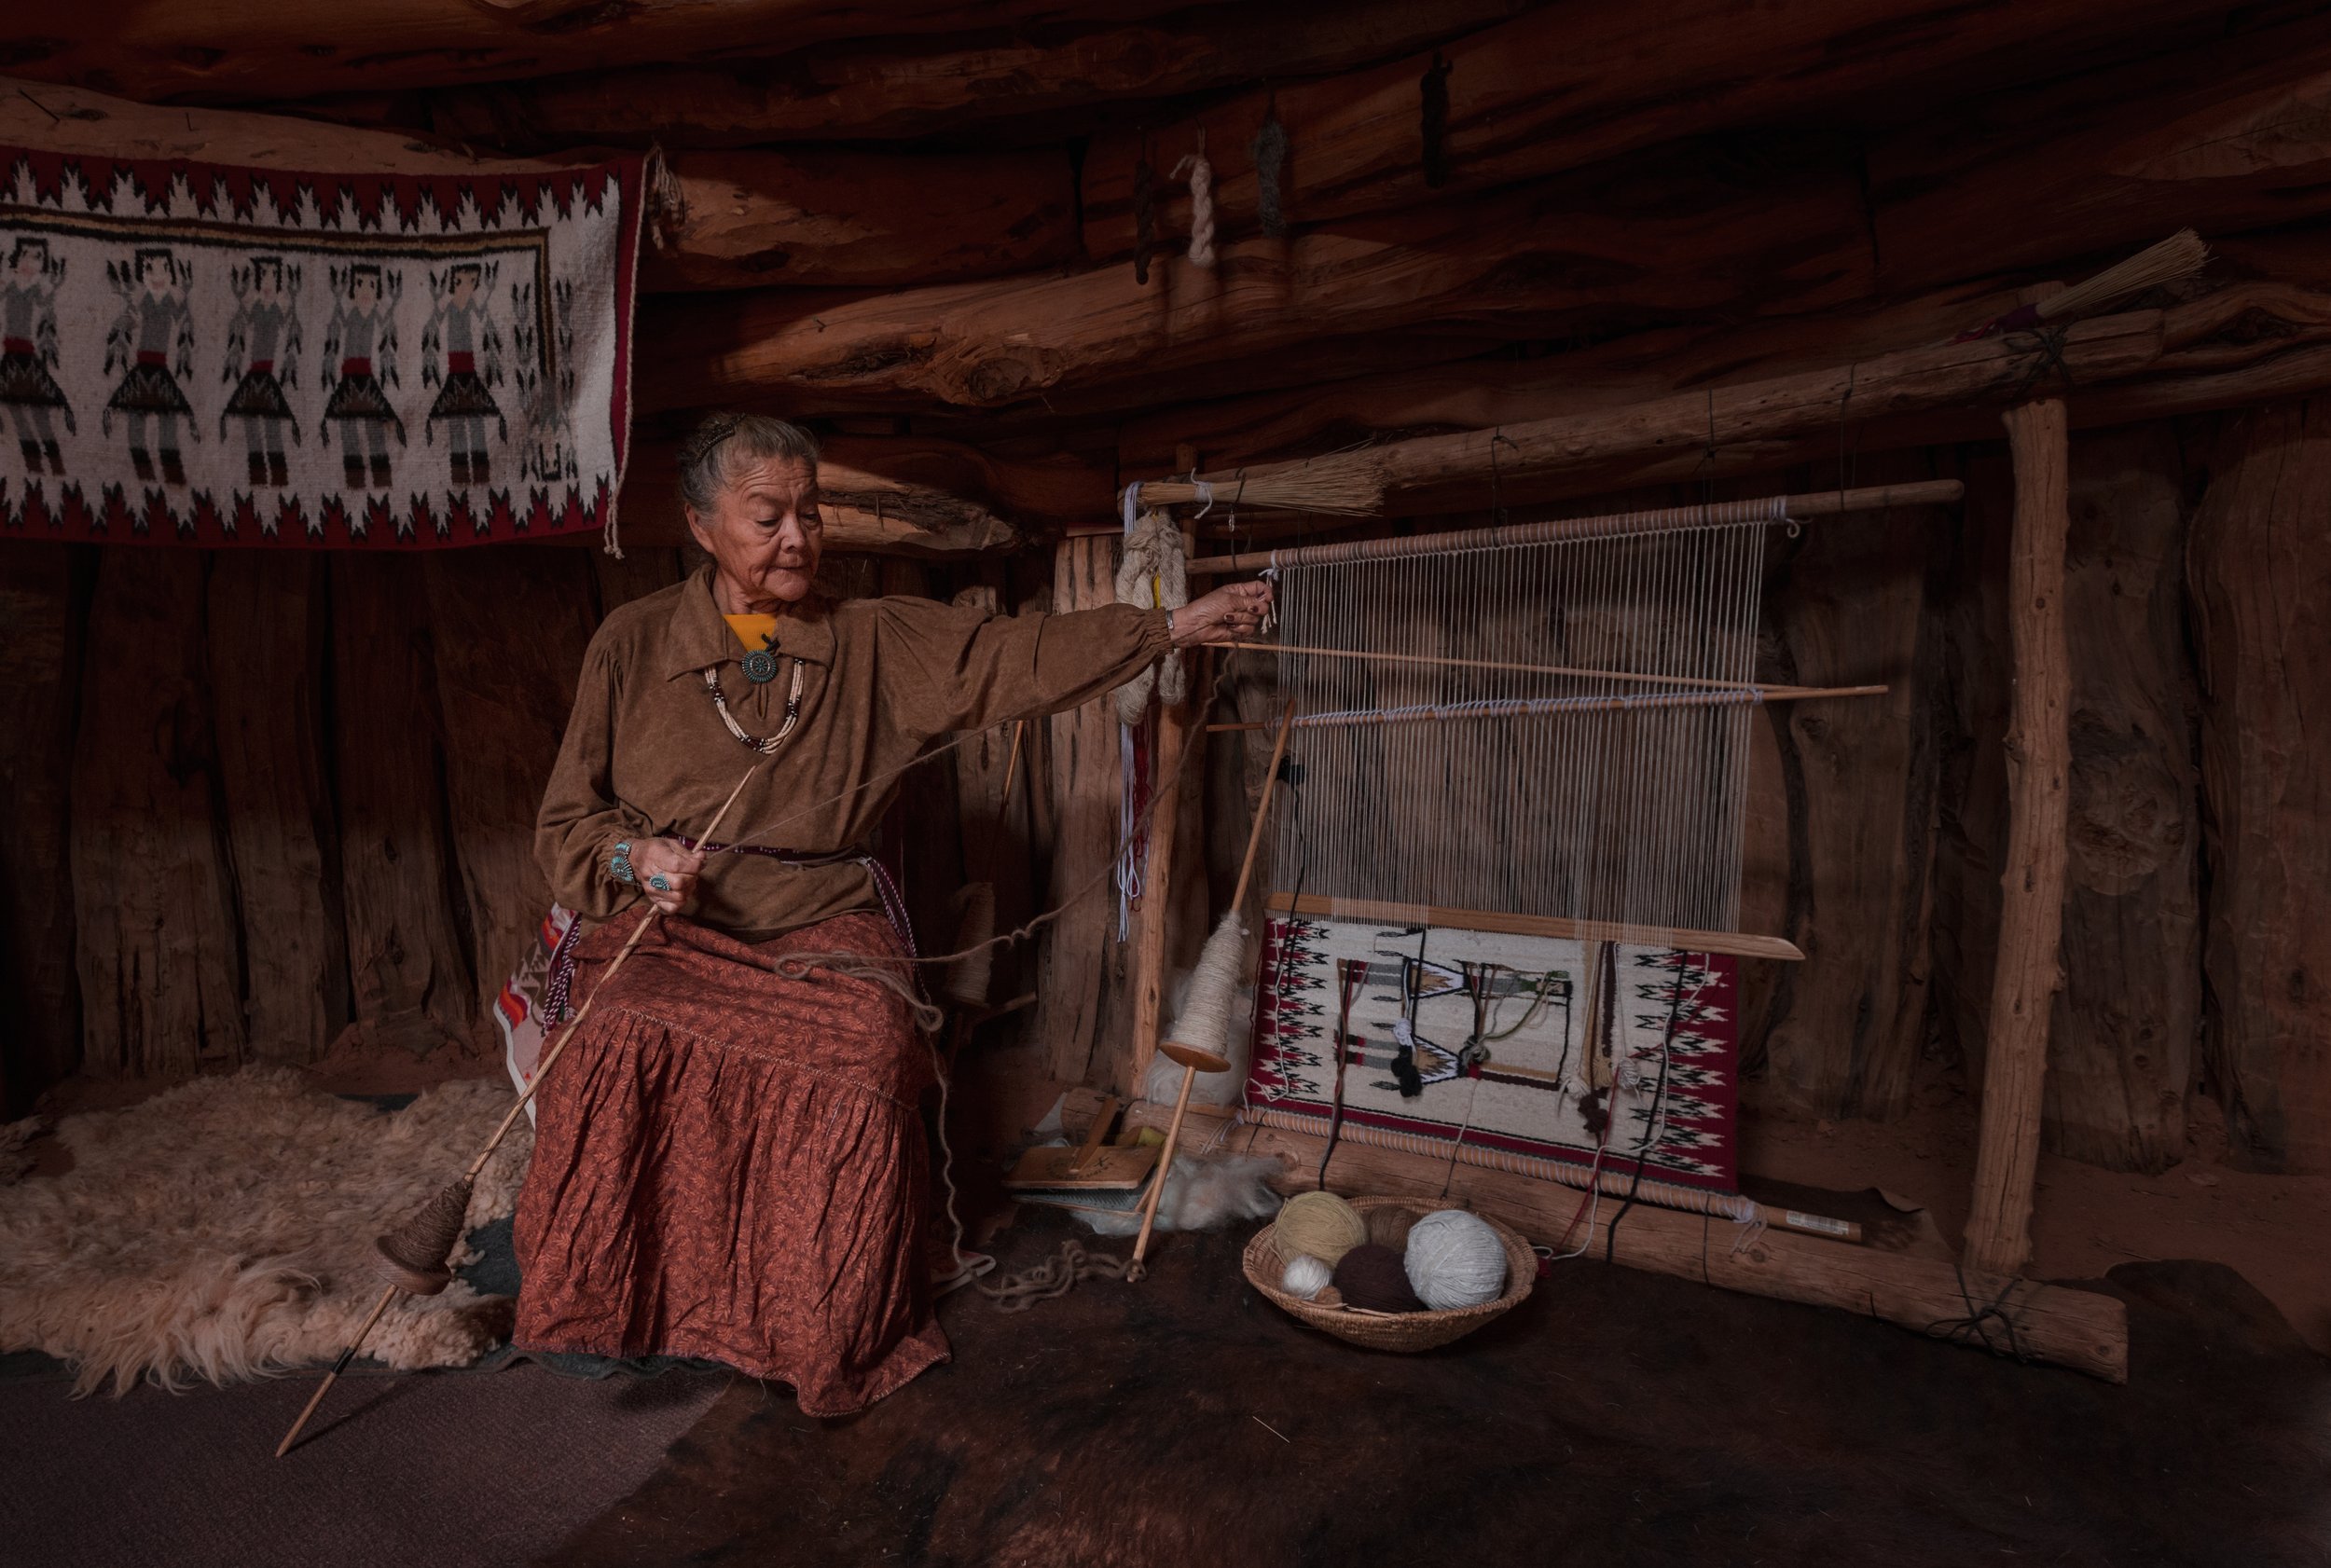  Effie Yazzie stretches her yarn from her spindle to prepare it being weaved into the rug 